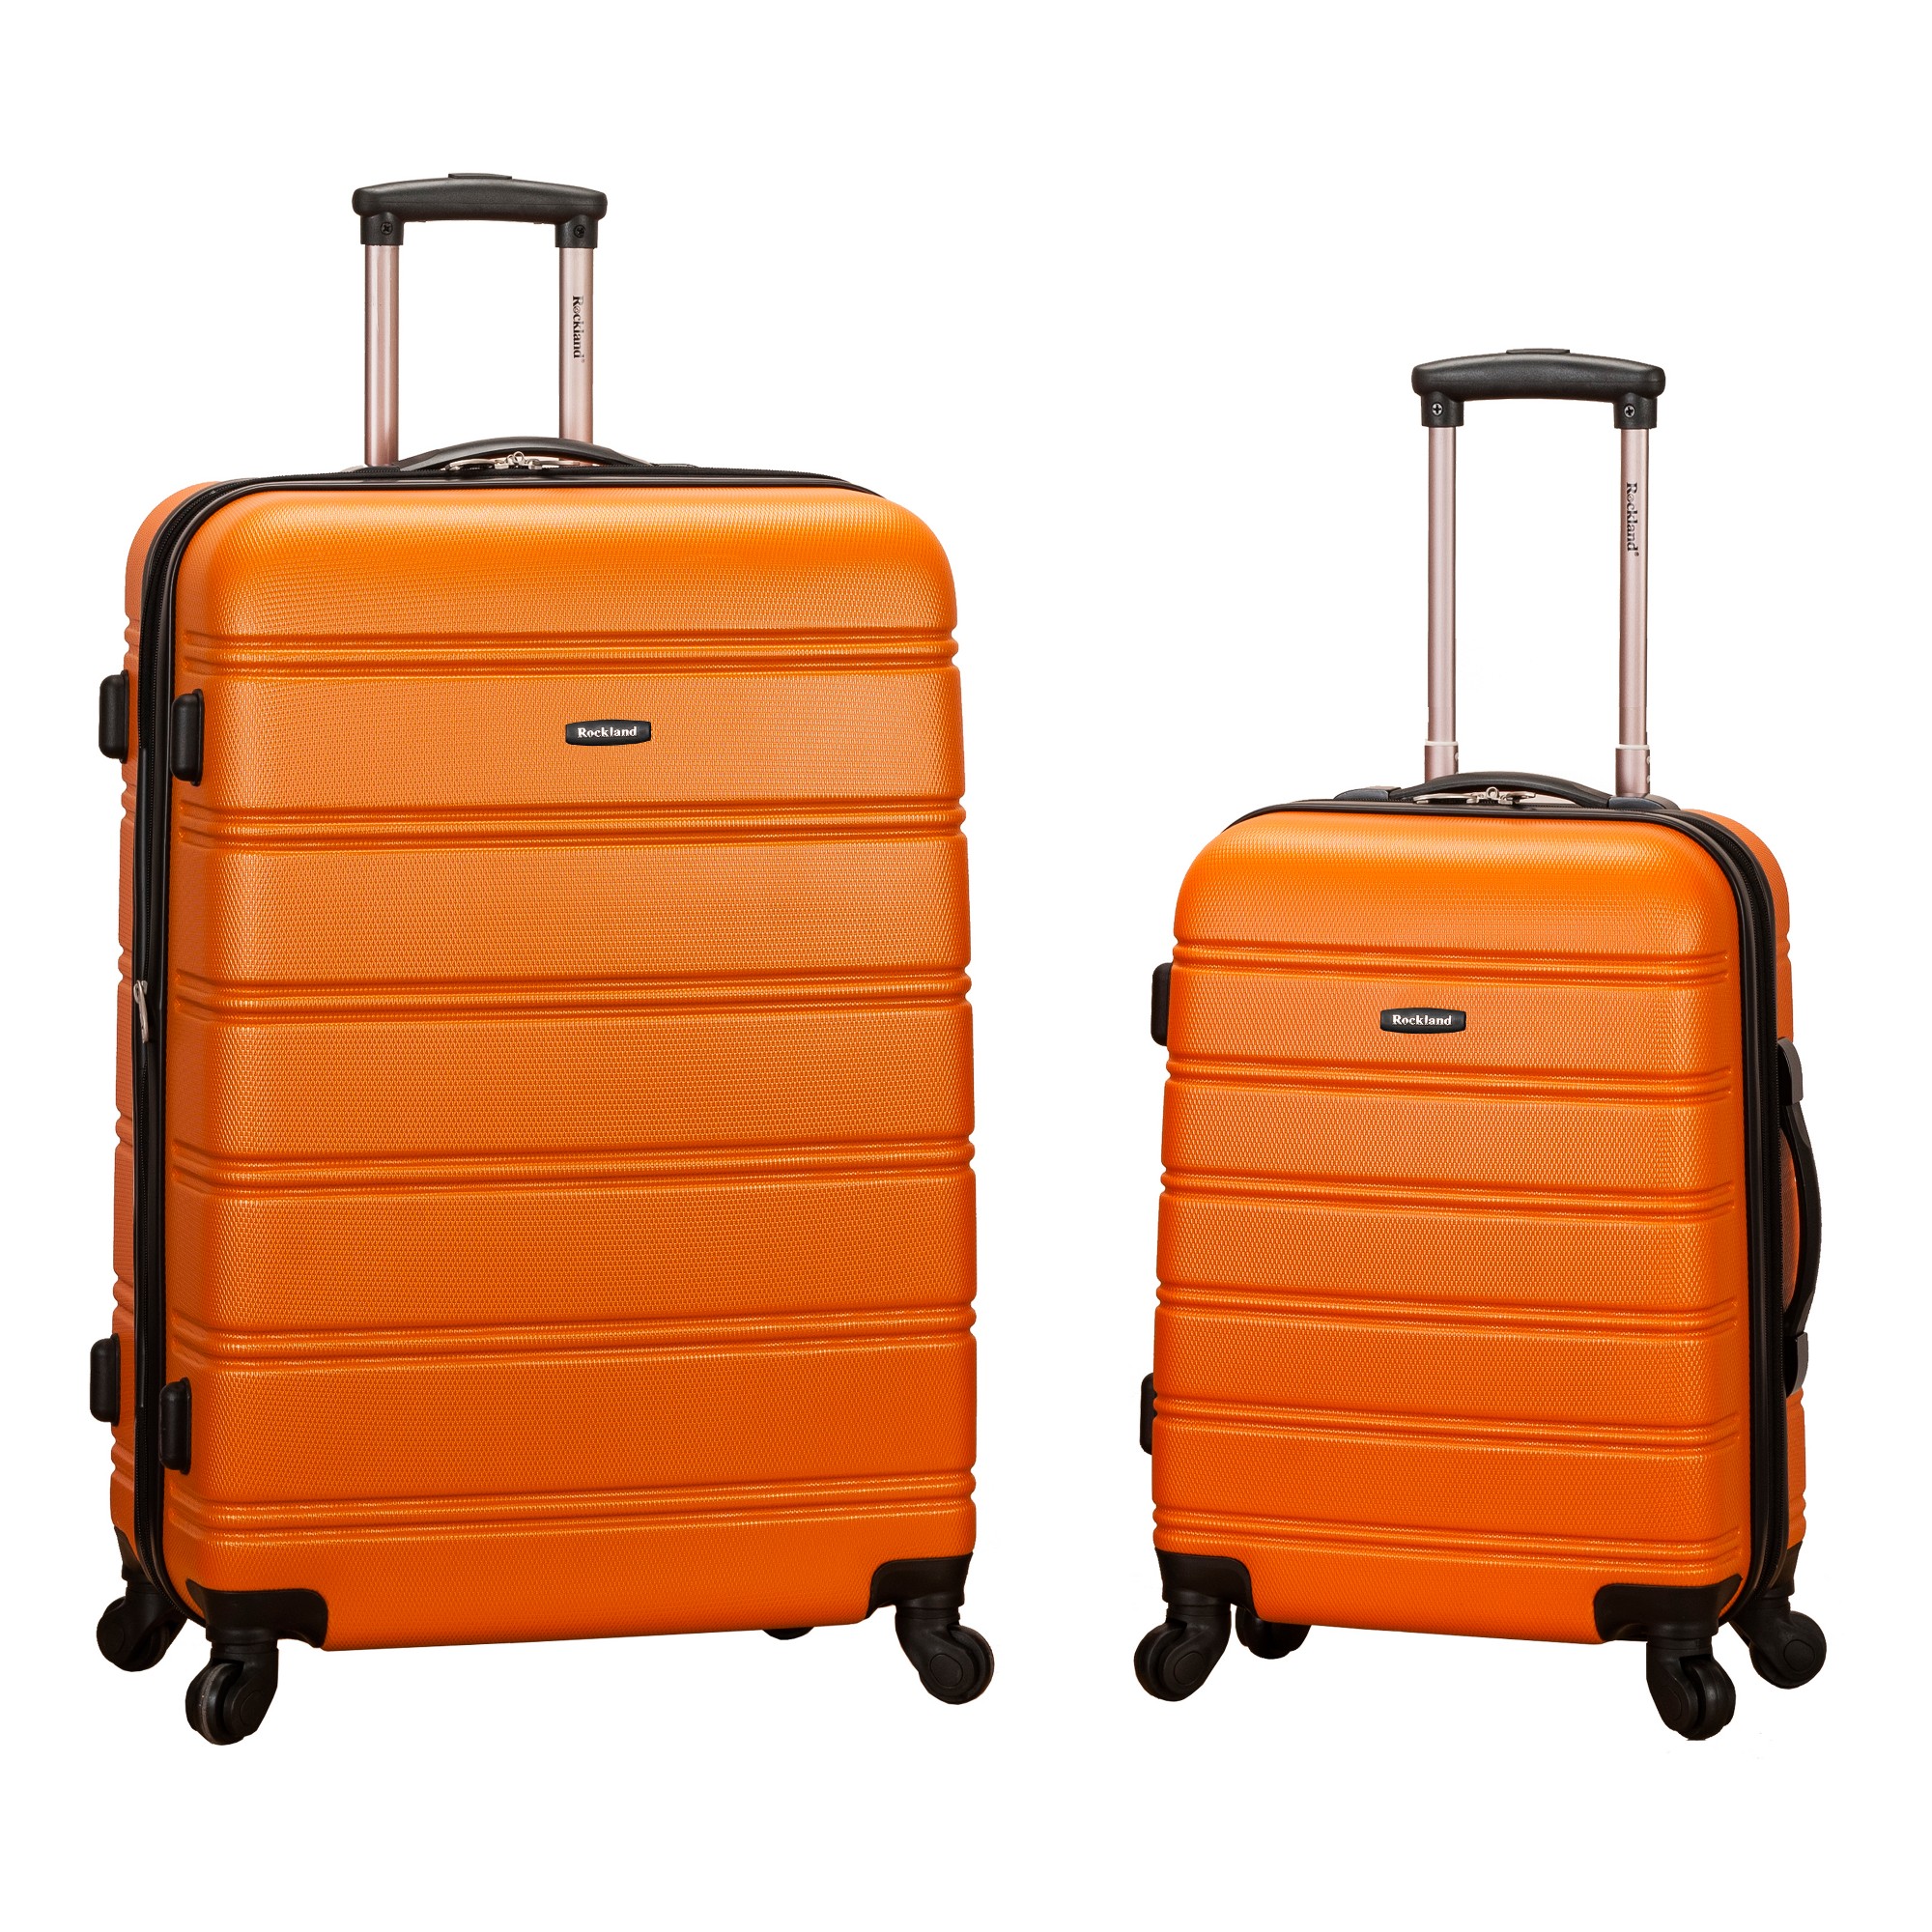 Rockland Melbourne 2pc Expandable ABS Spinner Luggage Set - Orange